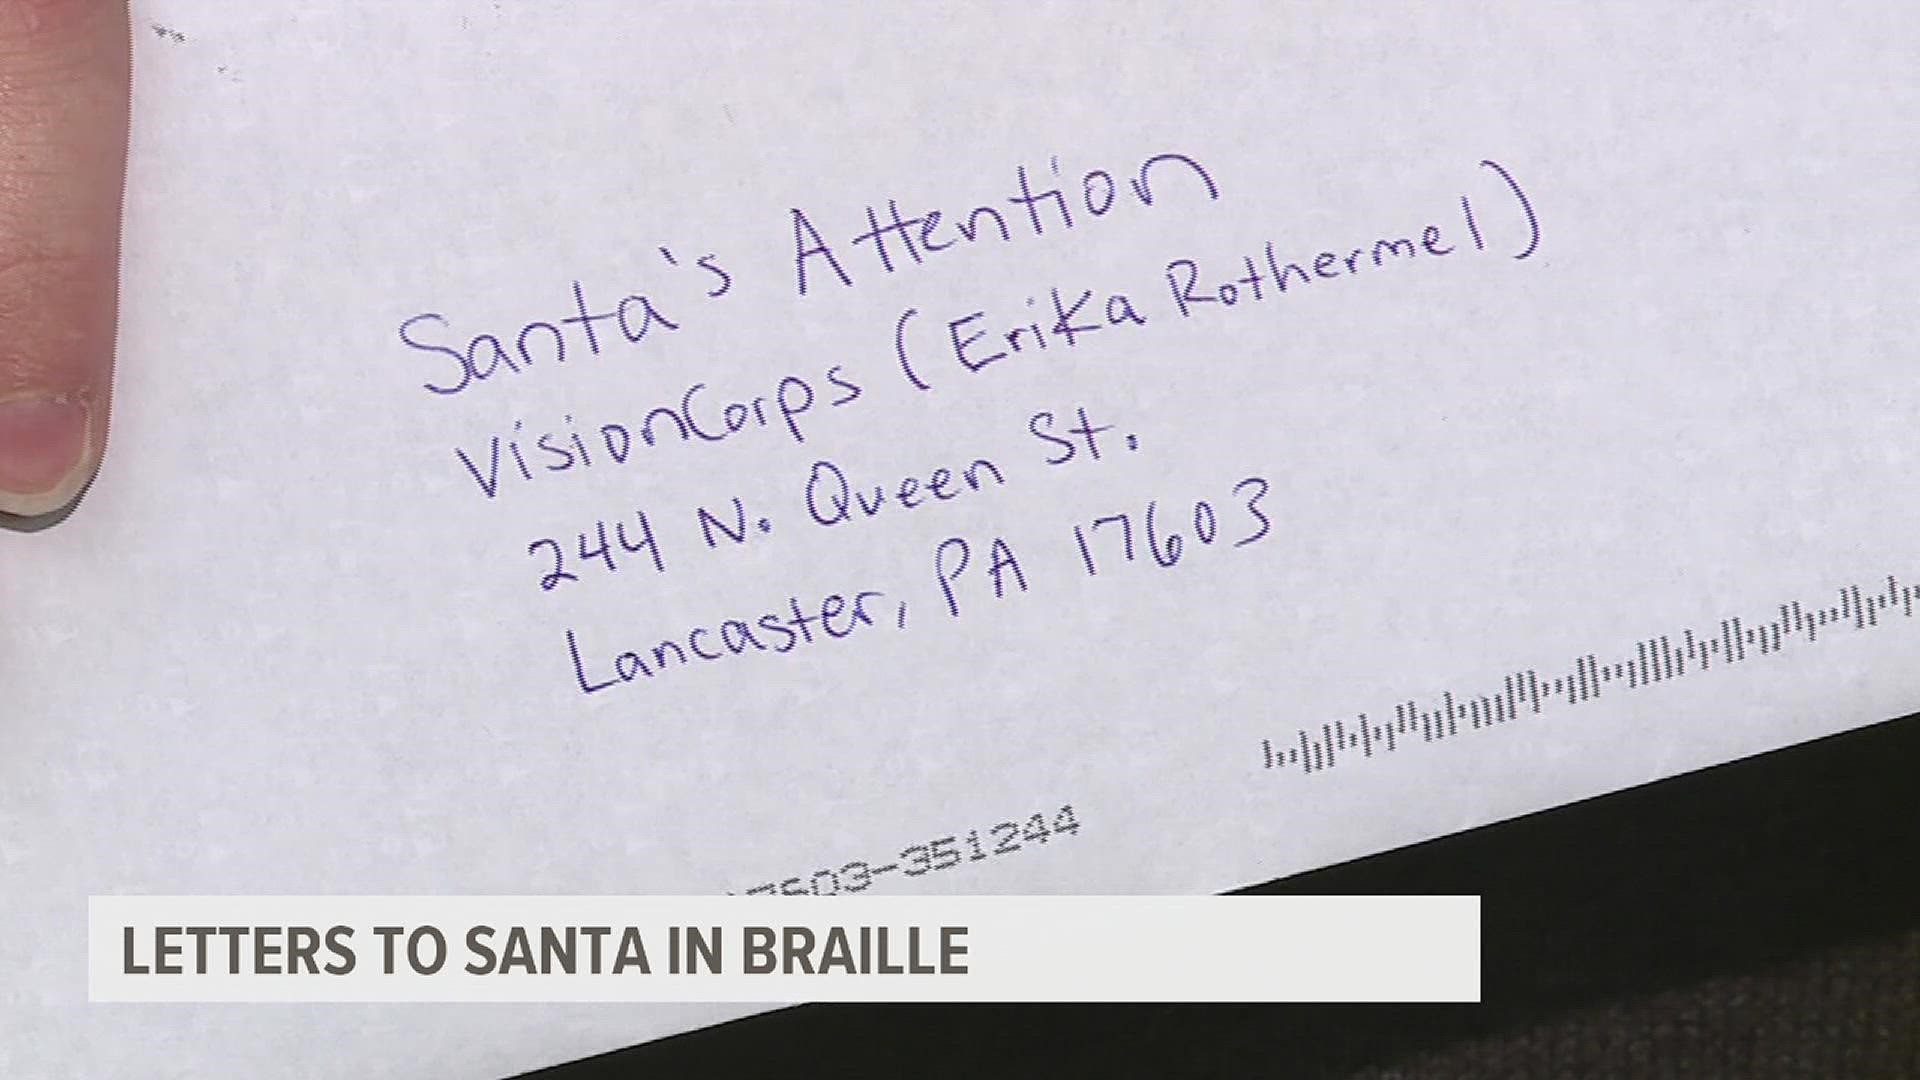 The invitation is open to all children of all ages, whether they're visually impaired or not. Each letter will receive a response from Santa, also in braille.